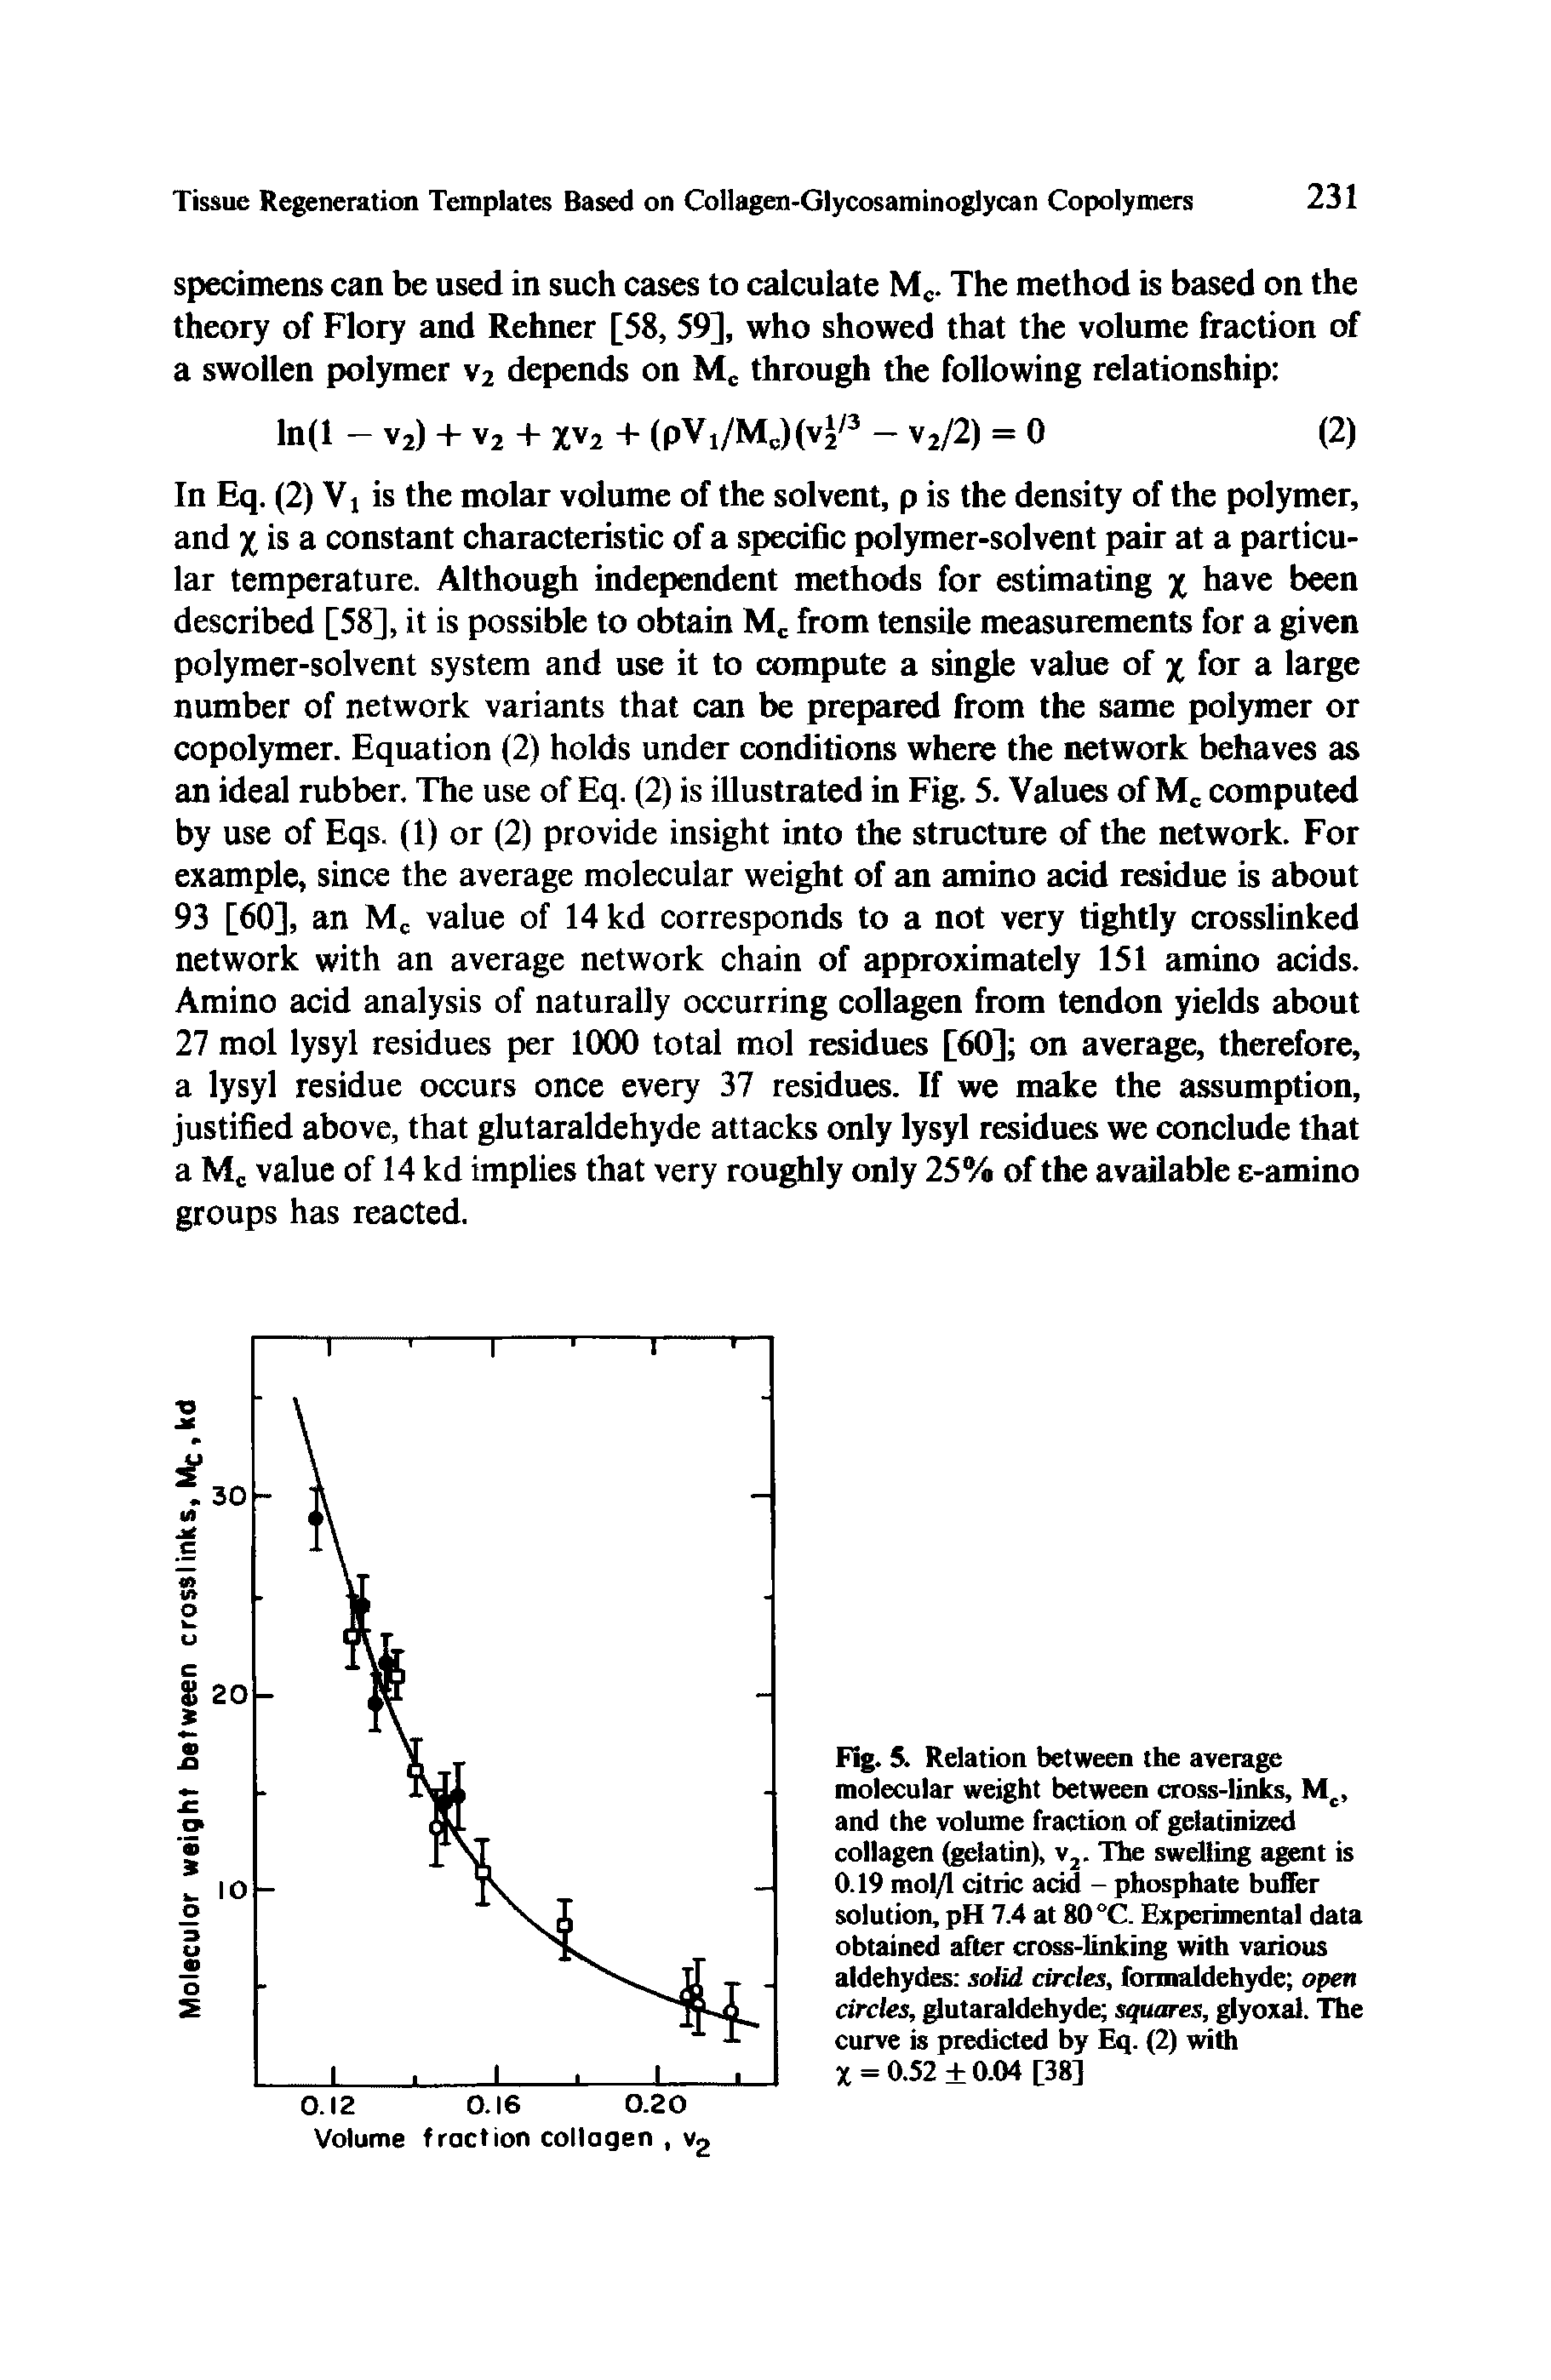 Fig. 5. Relation between the average molecular weight between cross-links, Mc, and the volume fraction of gelatinized collagen (gelatin), v2. The swelling agent is 0.19 mol/1 citric acid - phosphate buffer solution, pH 7.4 at 80 °C. Experimental data obtained after cross-linking with various aldehydes solid circles, formaldehyde open circles, glutaraldehyde squares, glyoxal. The curve is predicted by Eq. (2) with X = 0.52 0.04 [38]...